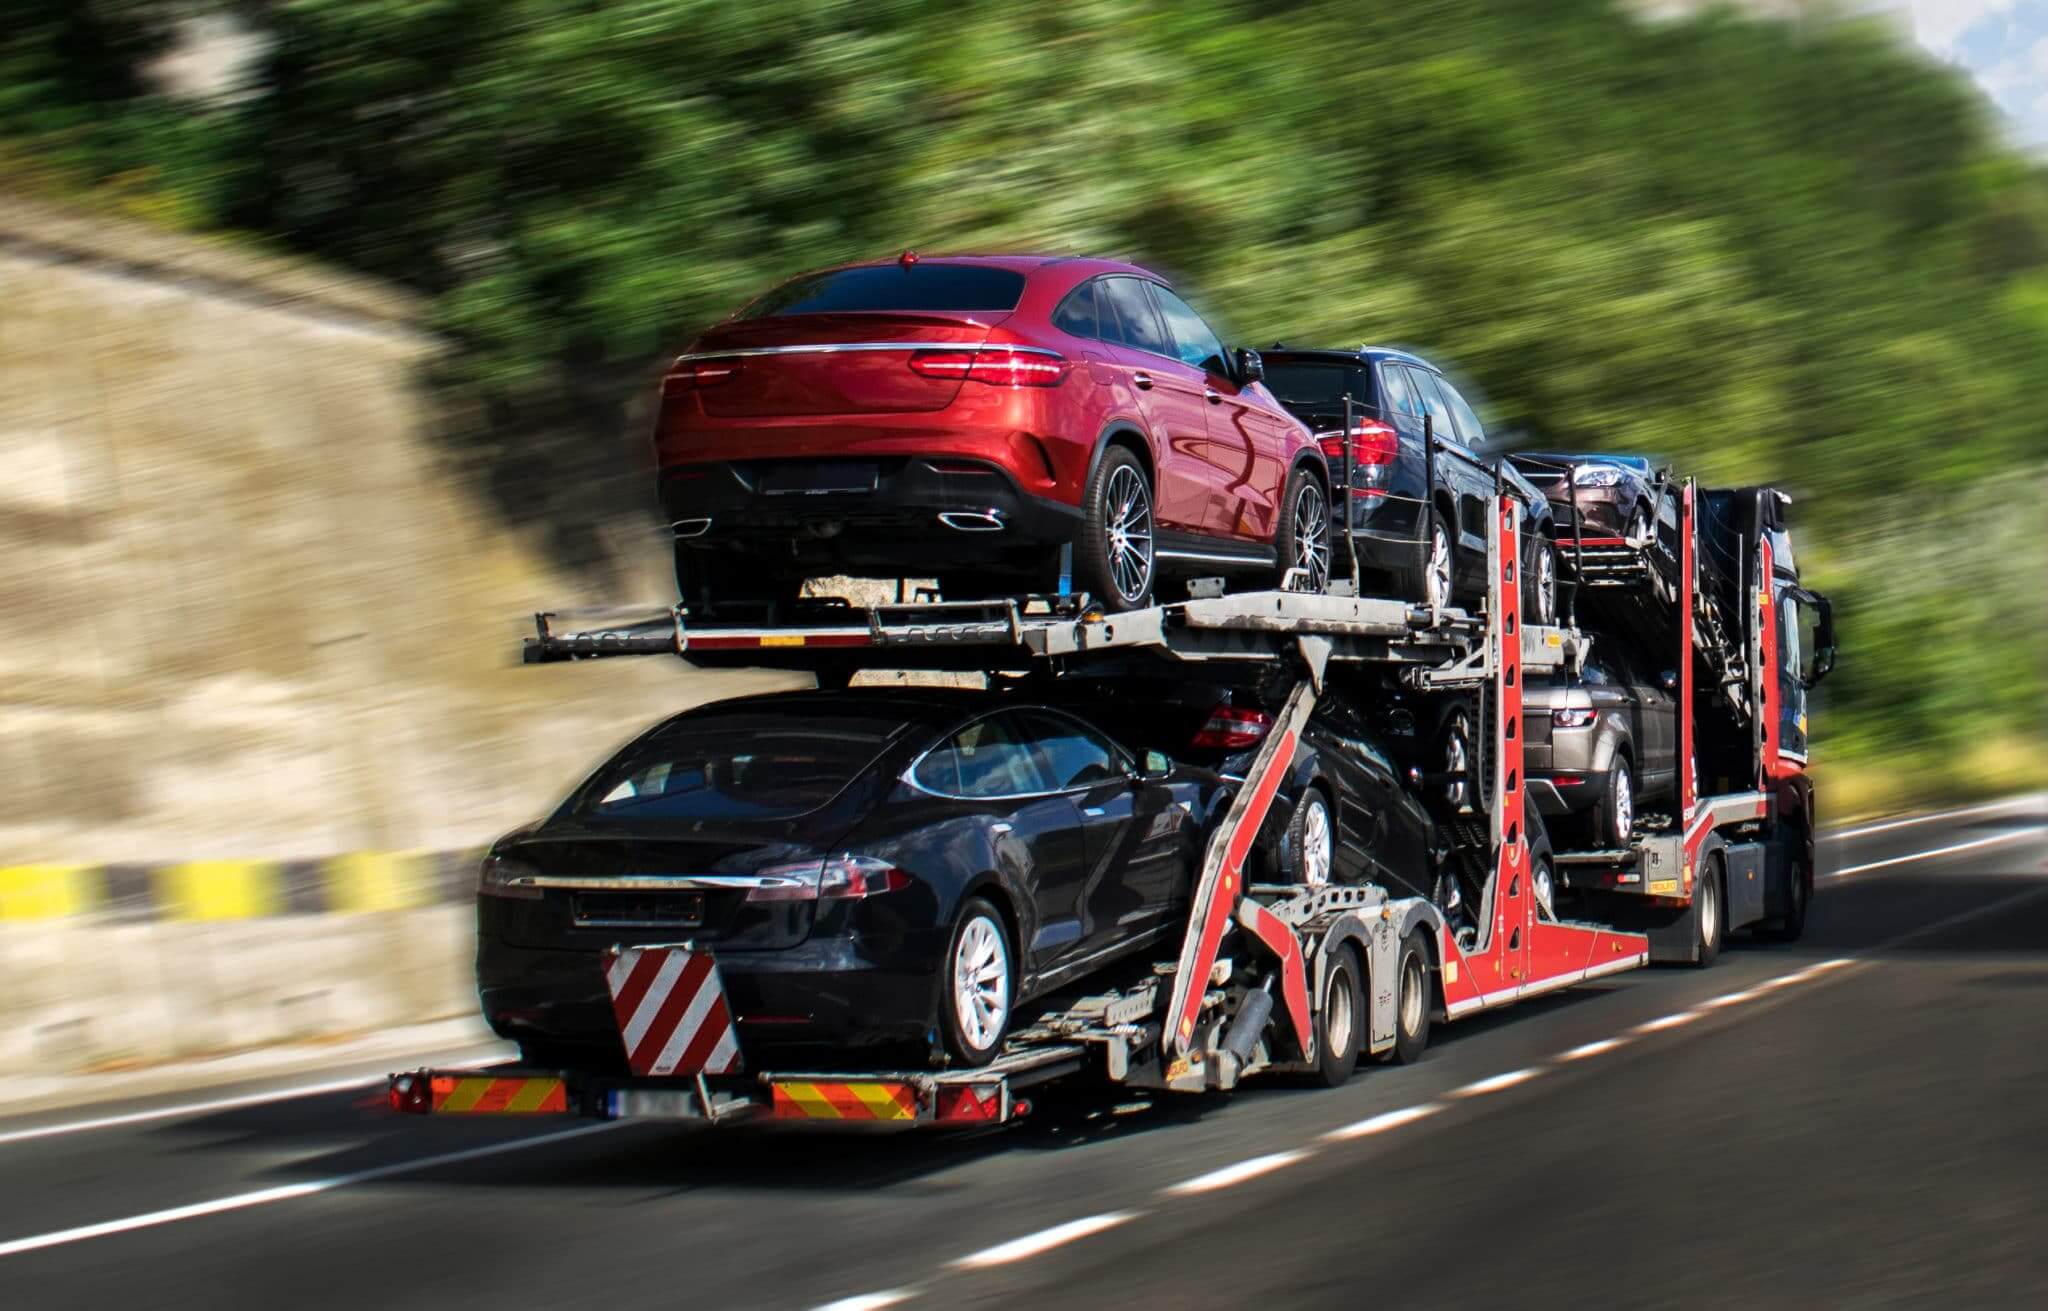 Open carrier transporting cars on a highway